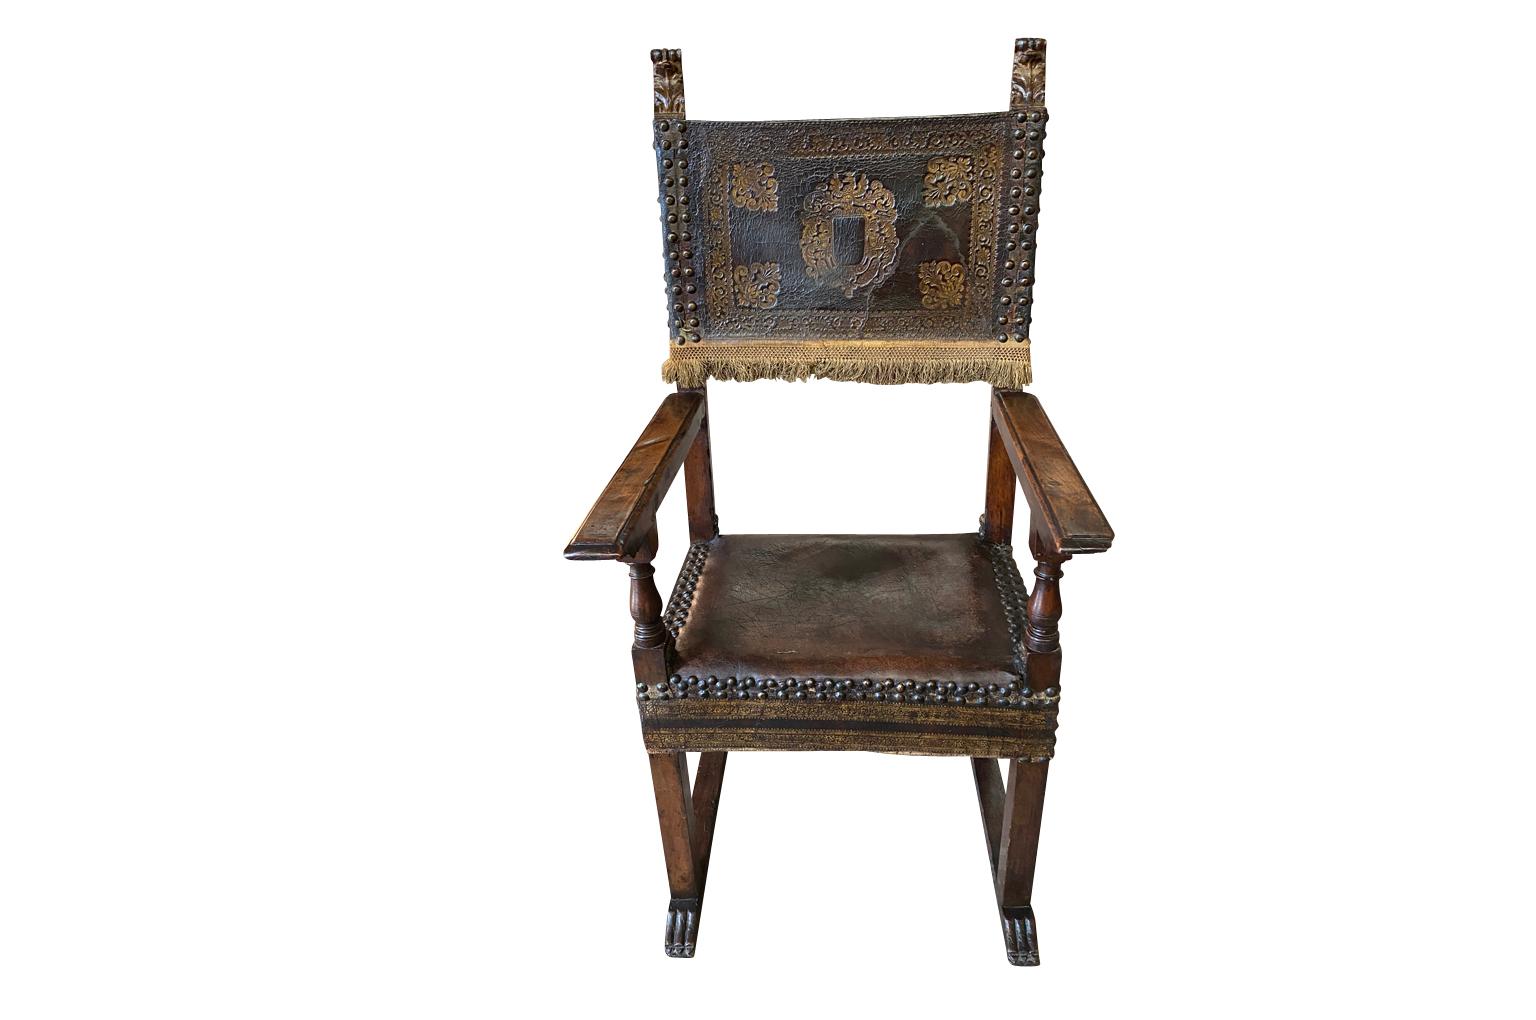 An exquisite Renaissance period armchair from Lombardy, Italy. Wonderfully constructed from walnut and tooled leather accented with gold gilt and handsome nail heads. Very sturdy with wonderful patina.